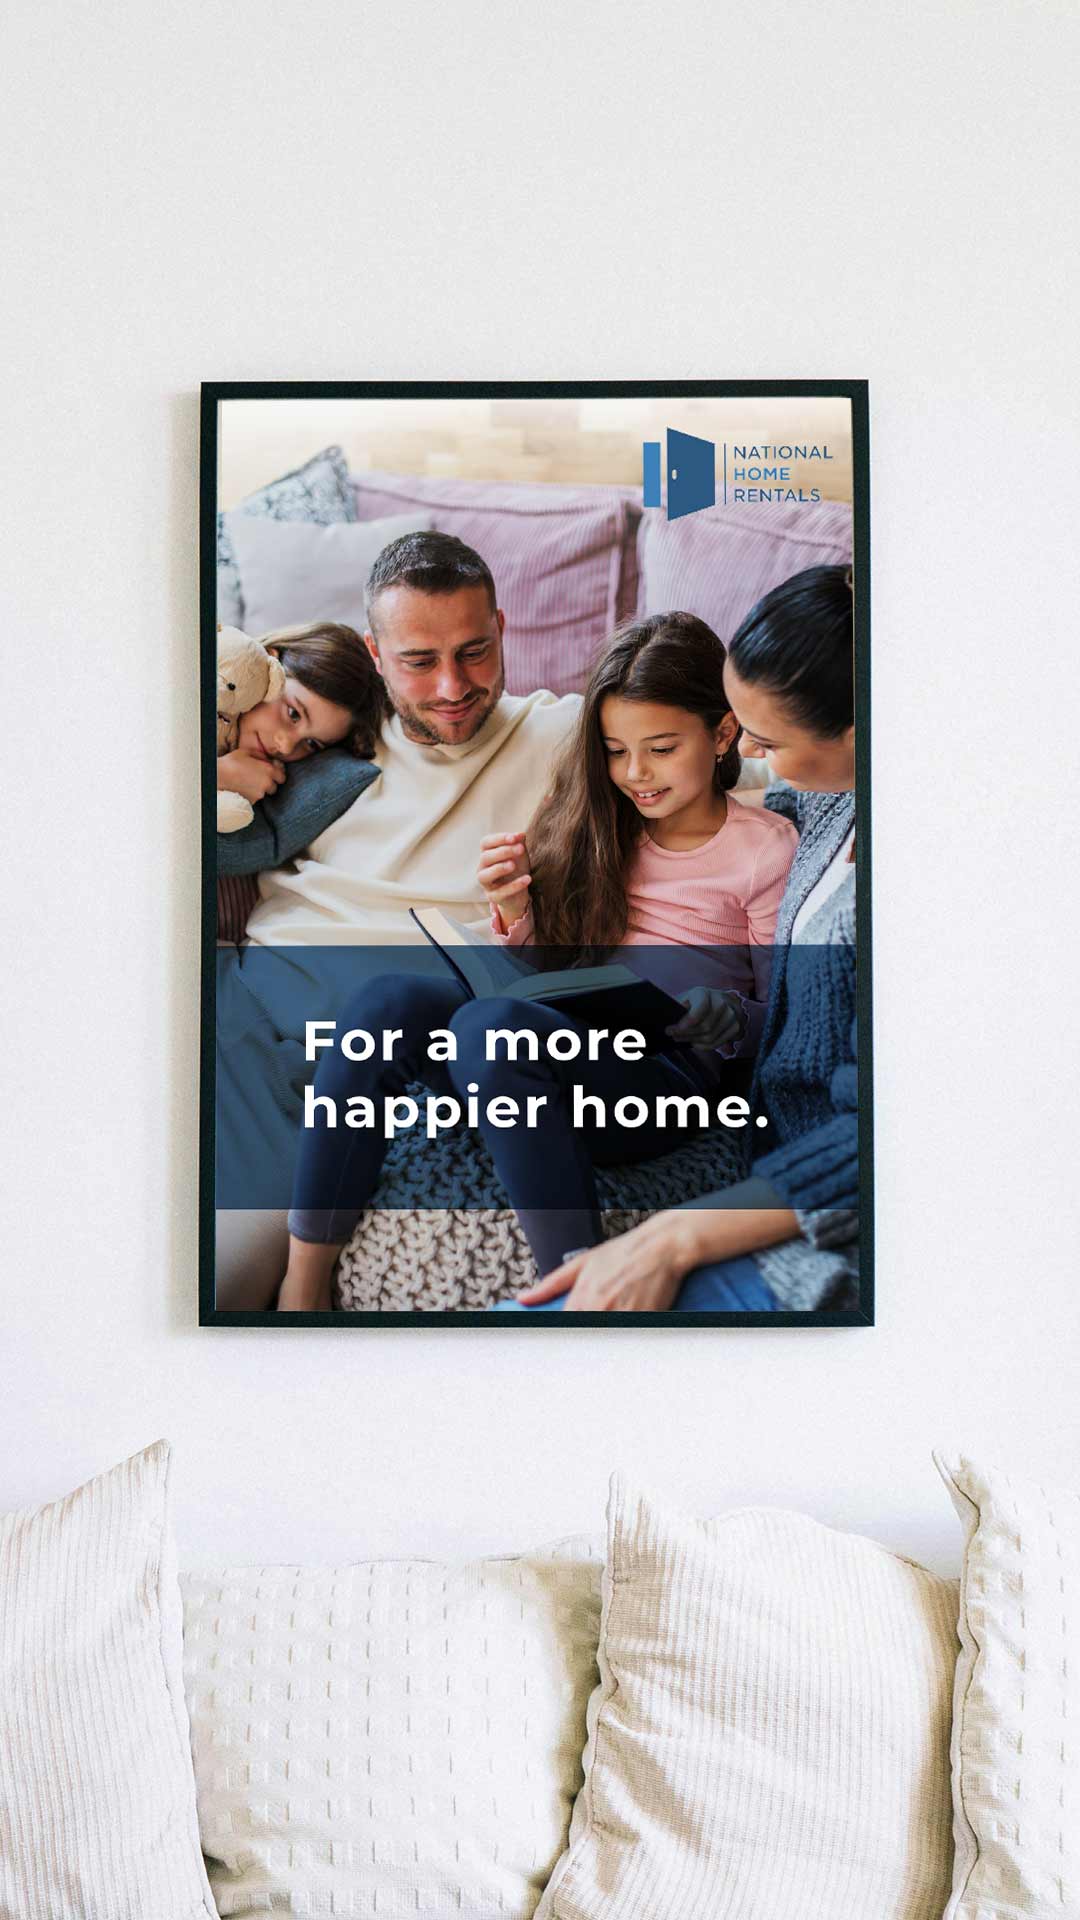 A family of four pictured in a frame on a wall with text that reads "For a more happier home".